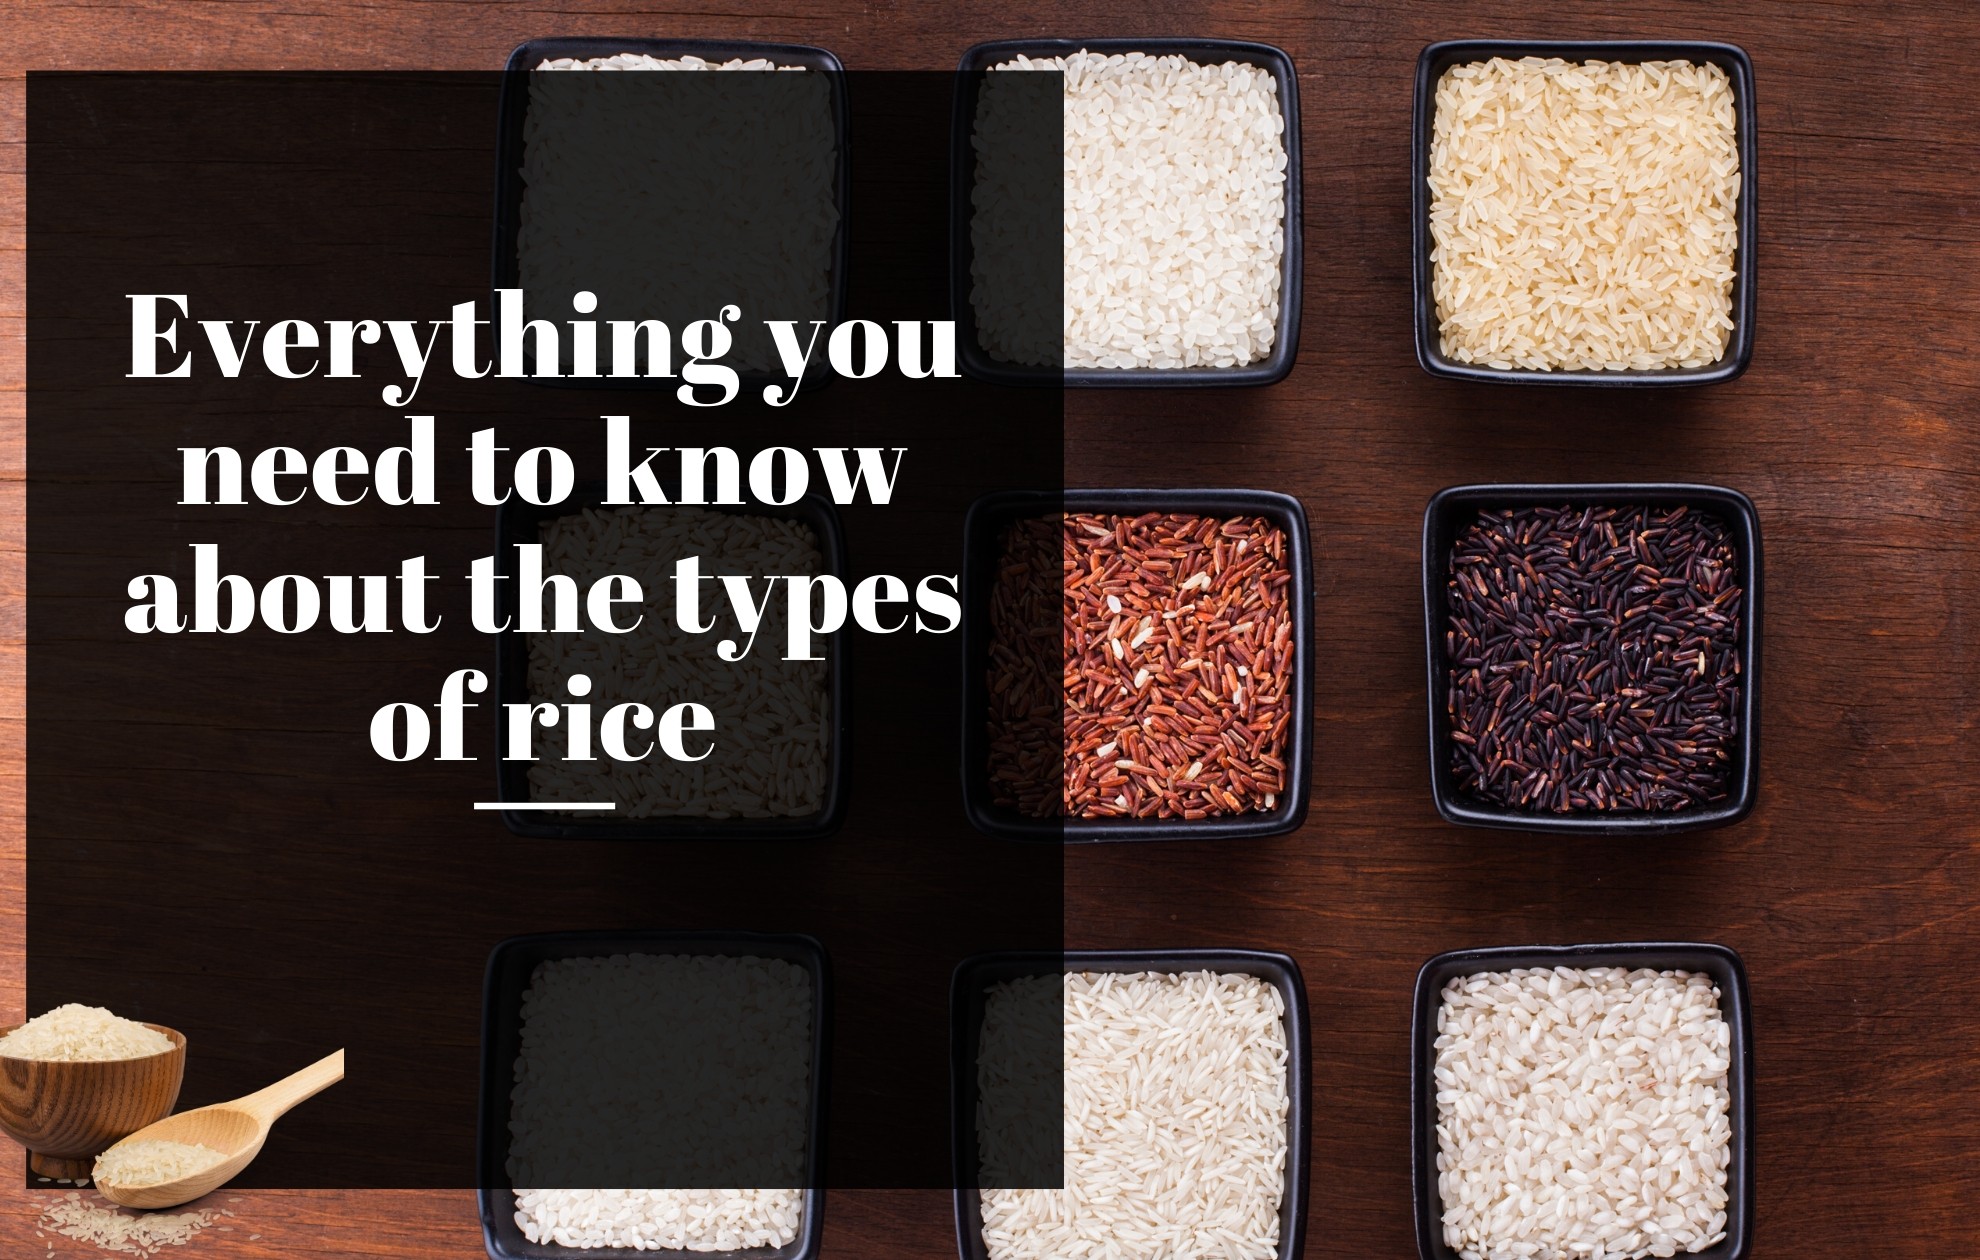 Everything you need to know about the types of rice